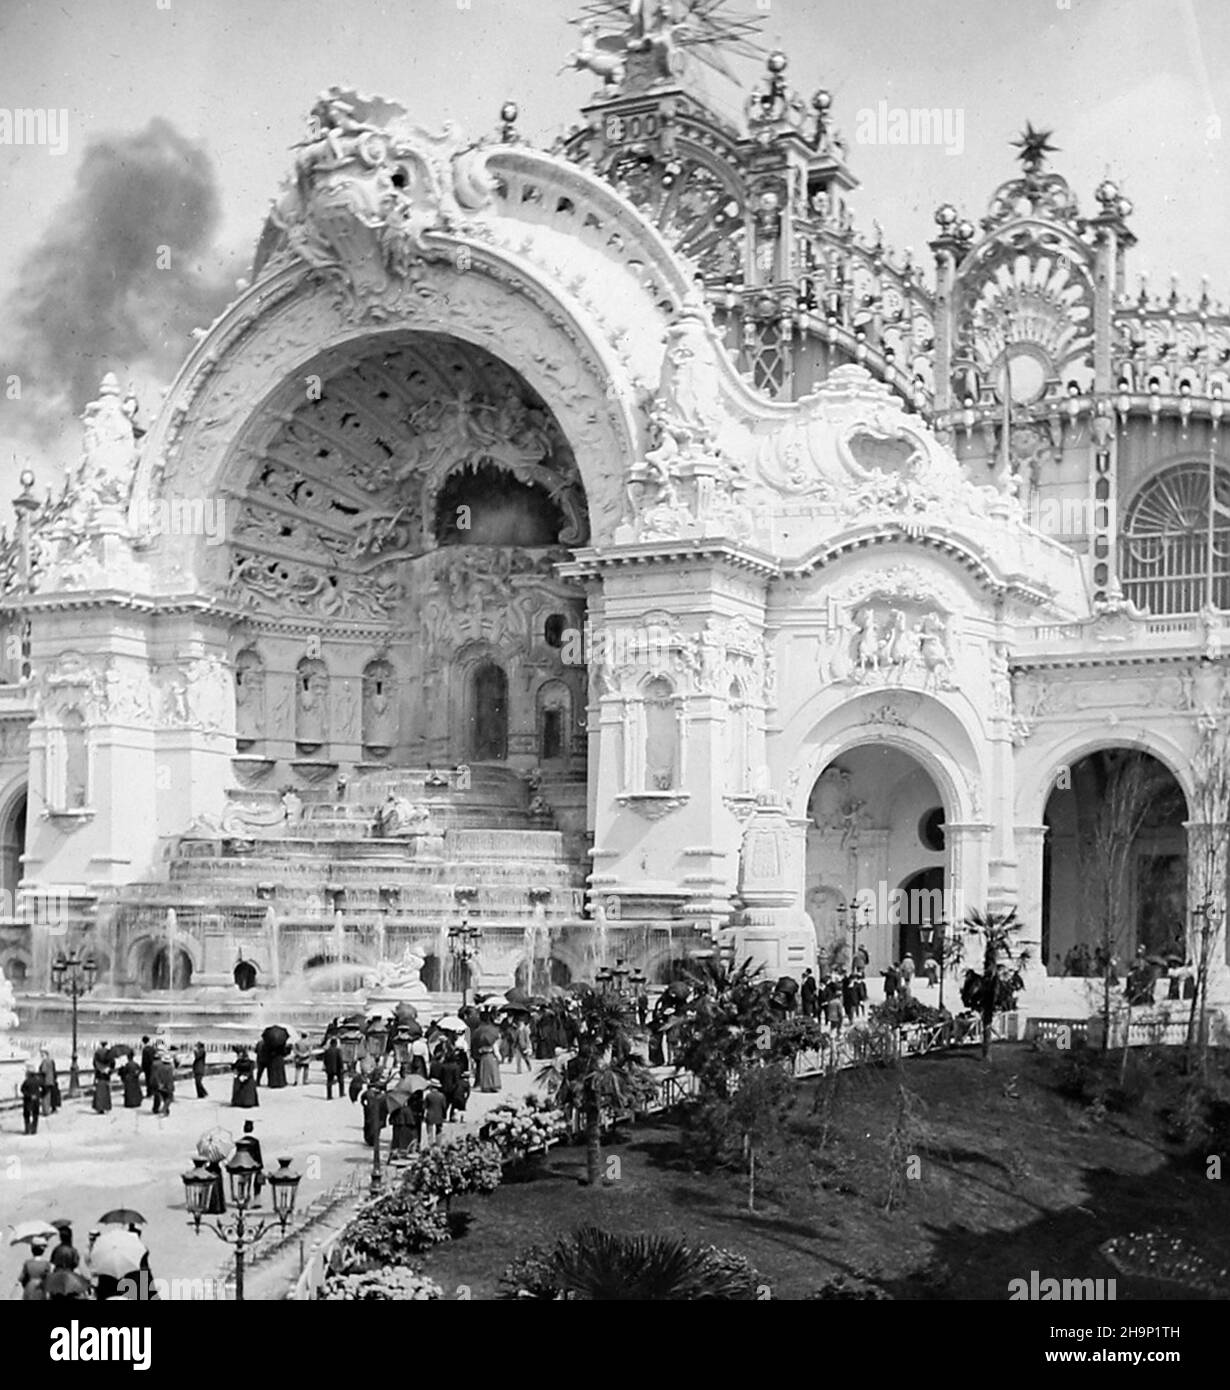 Großer Eingang, 1900 Exposition Universelle, Paris, Frankreich Stockfoto